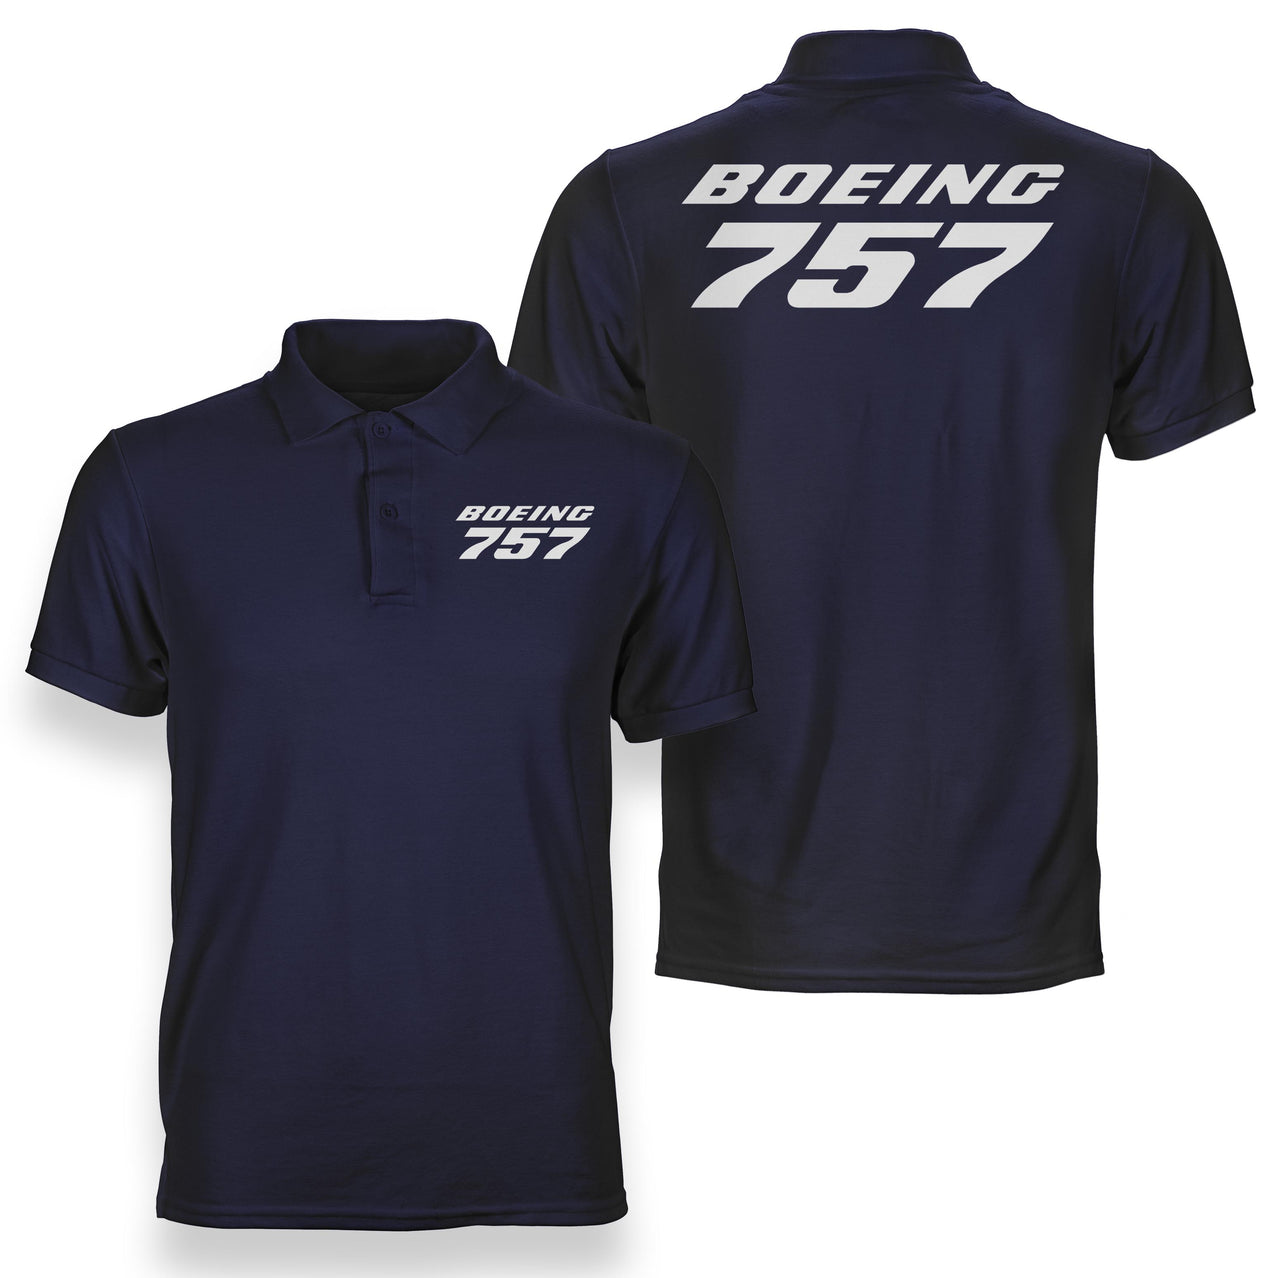 Boeing 757 & Text Designed Double Side Polo T-Shirts